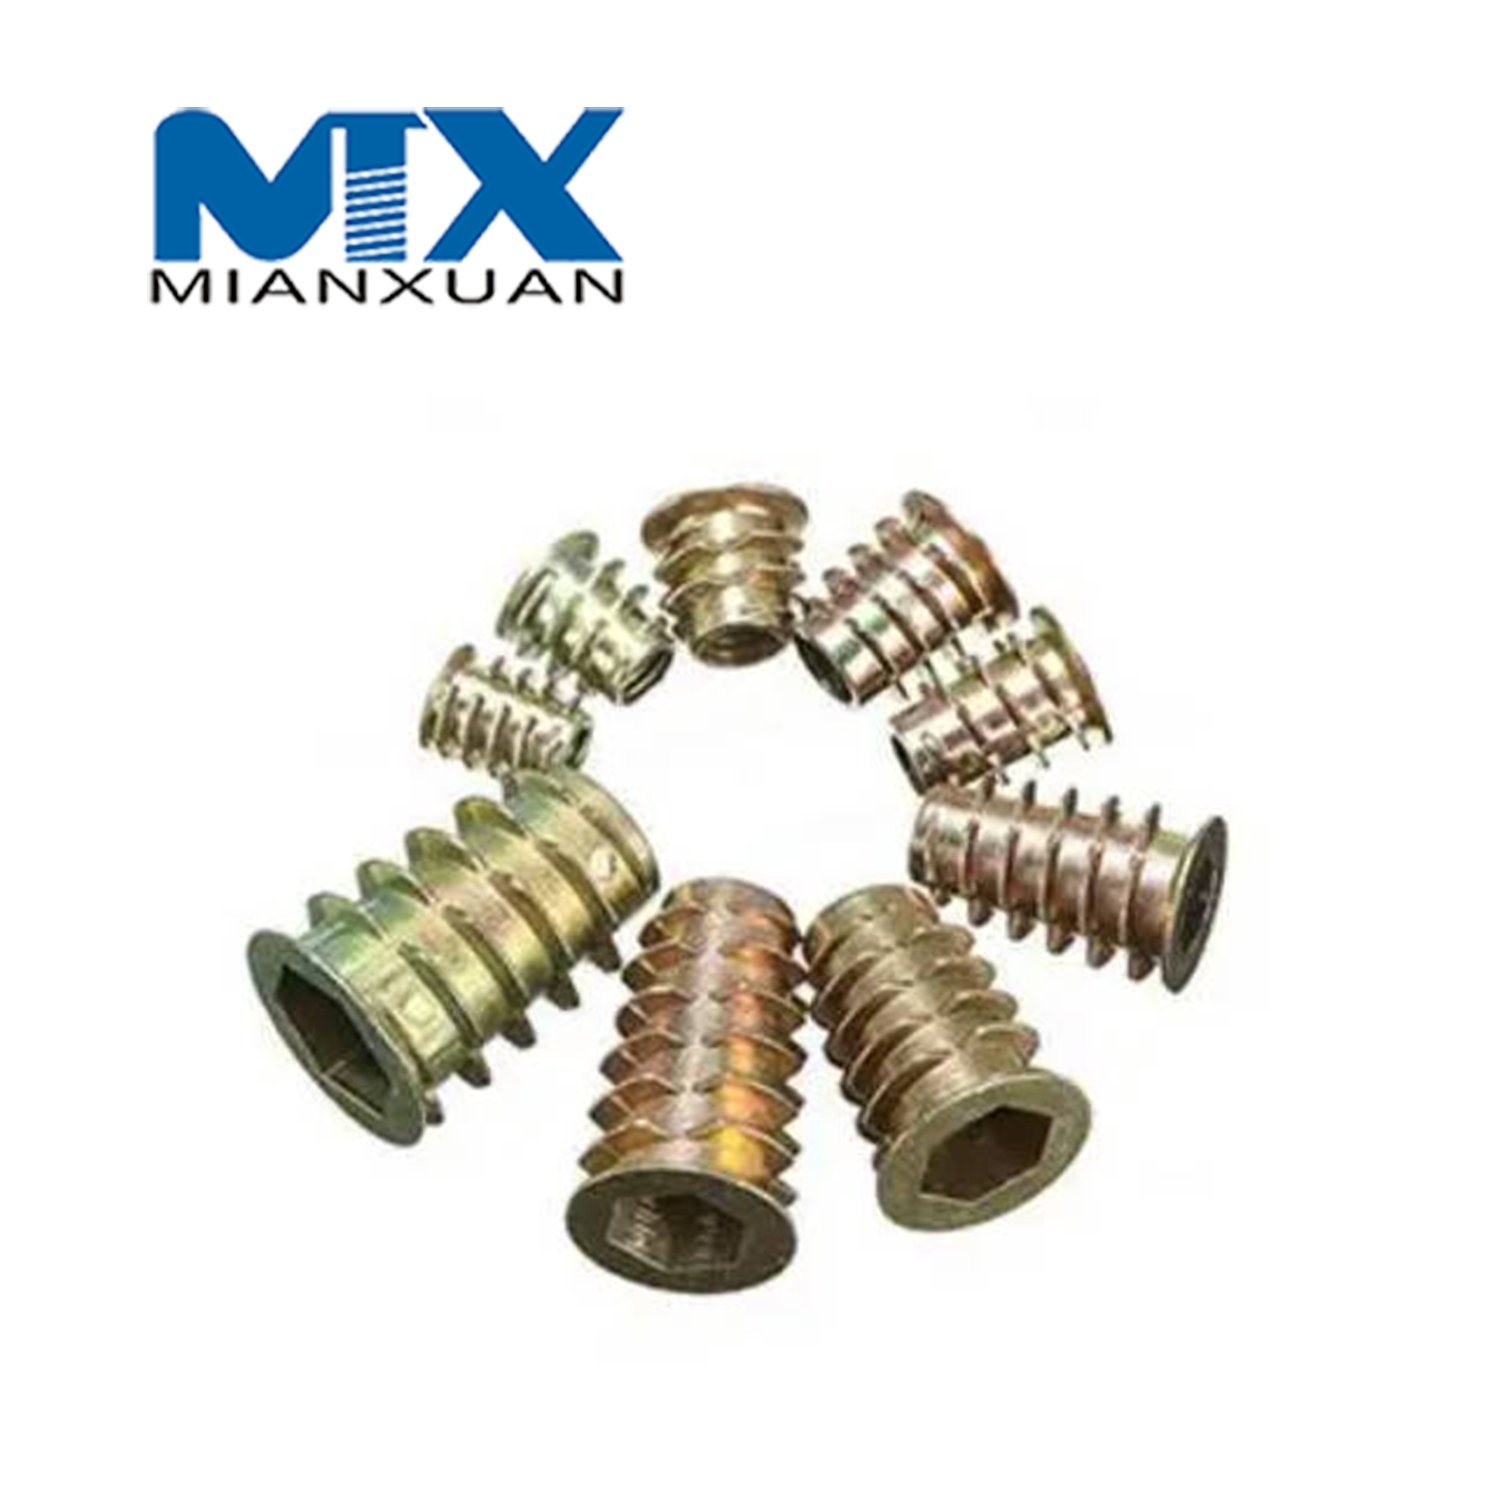 Zinc Alloy Thread for Wood Insert Nut Flanged Hex Head Furniture Nuts